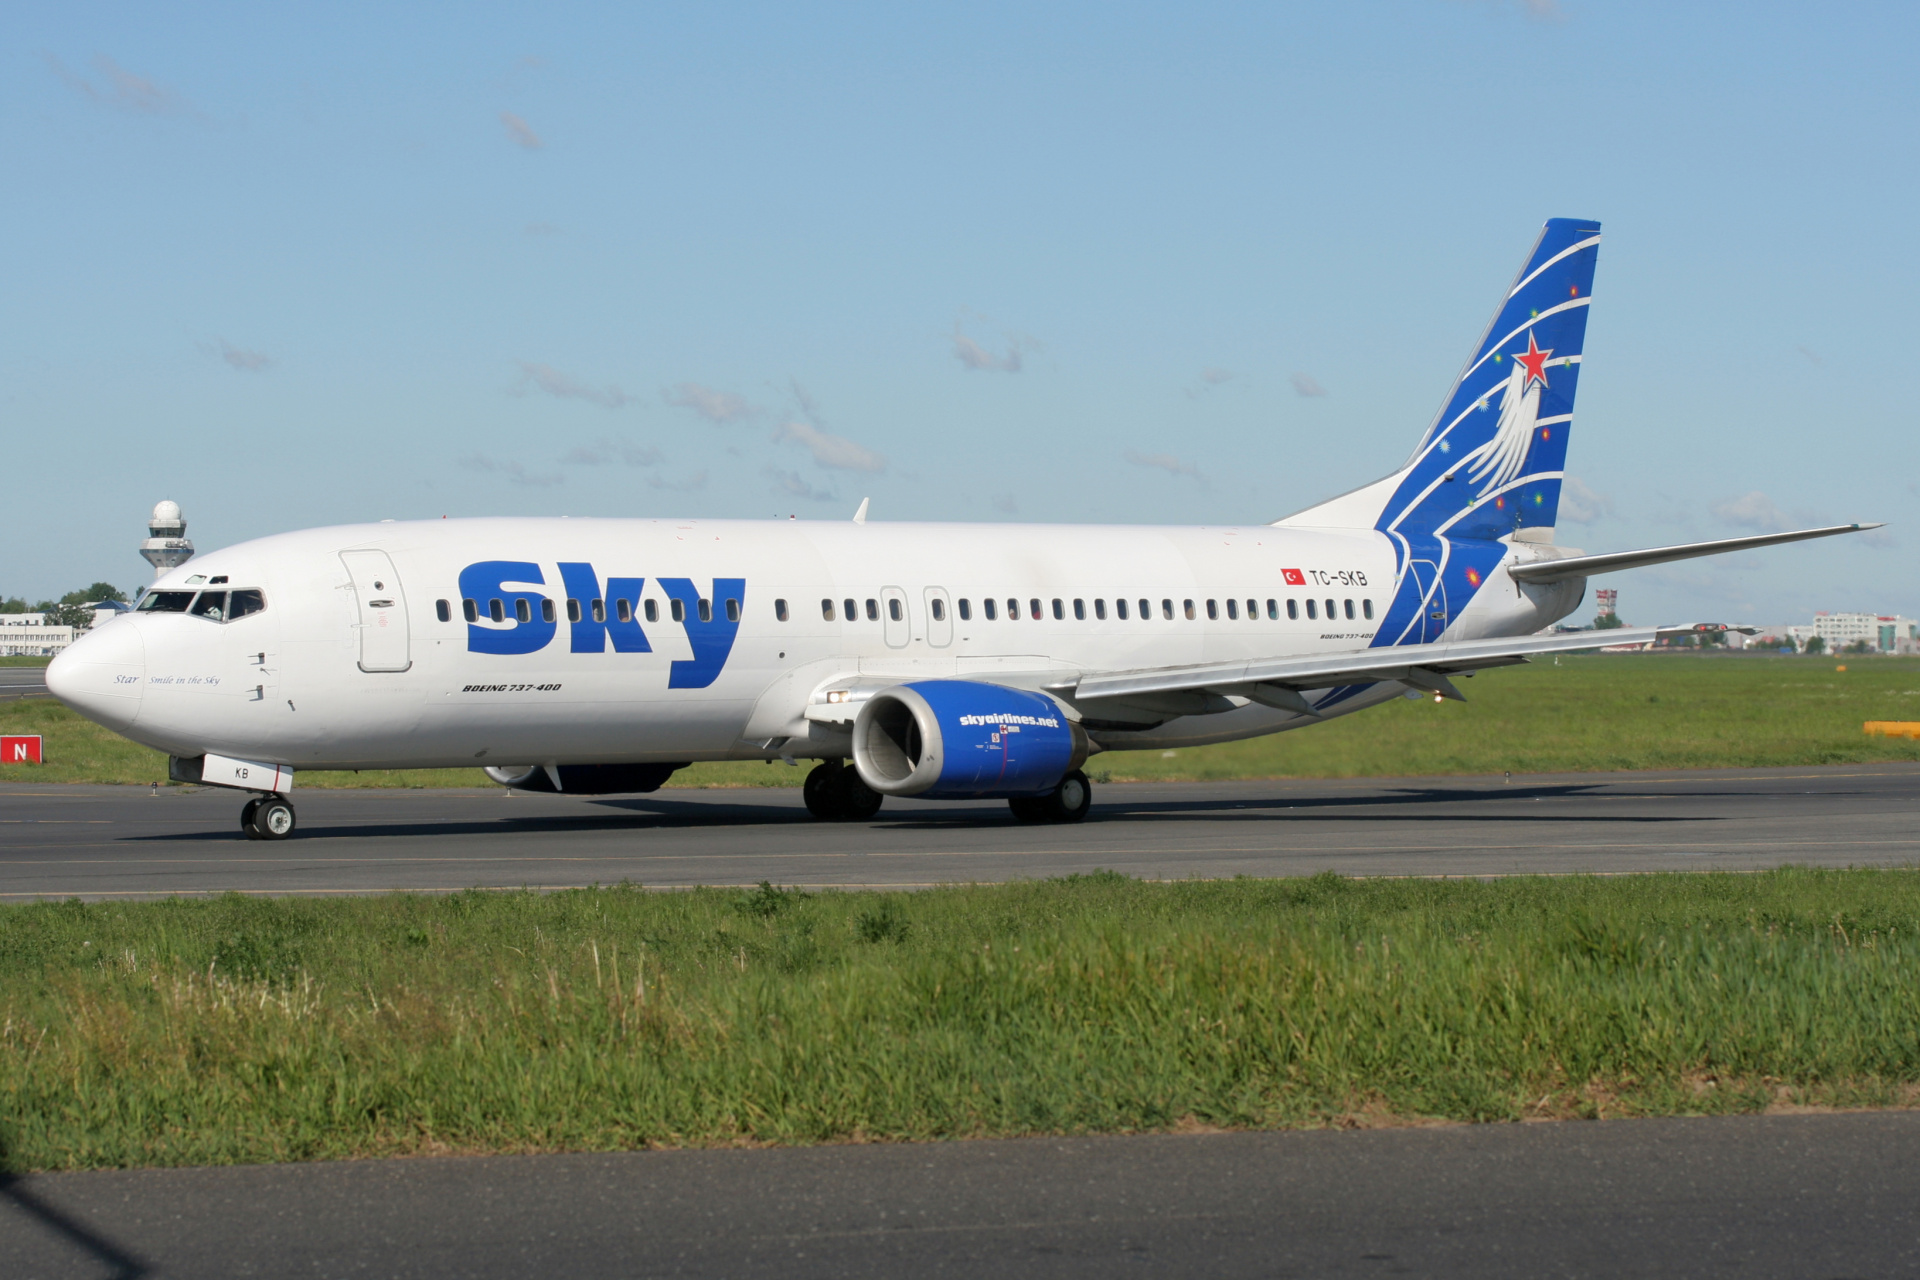 TC-SKB, Sky Airlines (Aircraft » EPWA Spotting » Boeing 737-400)